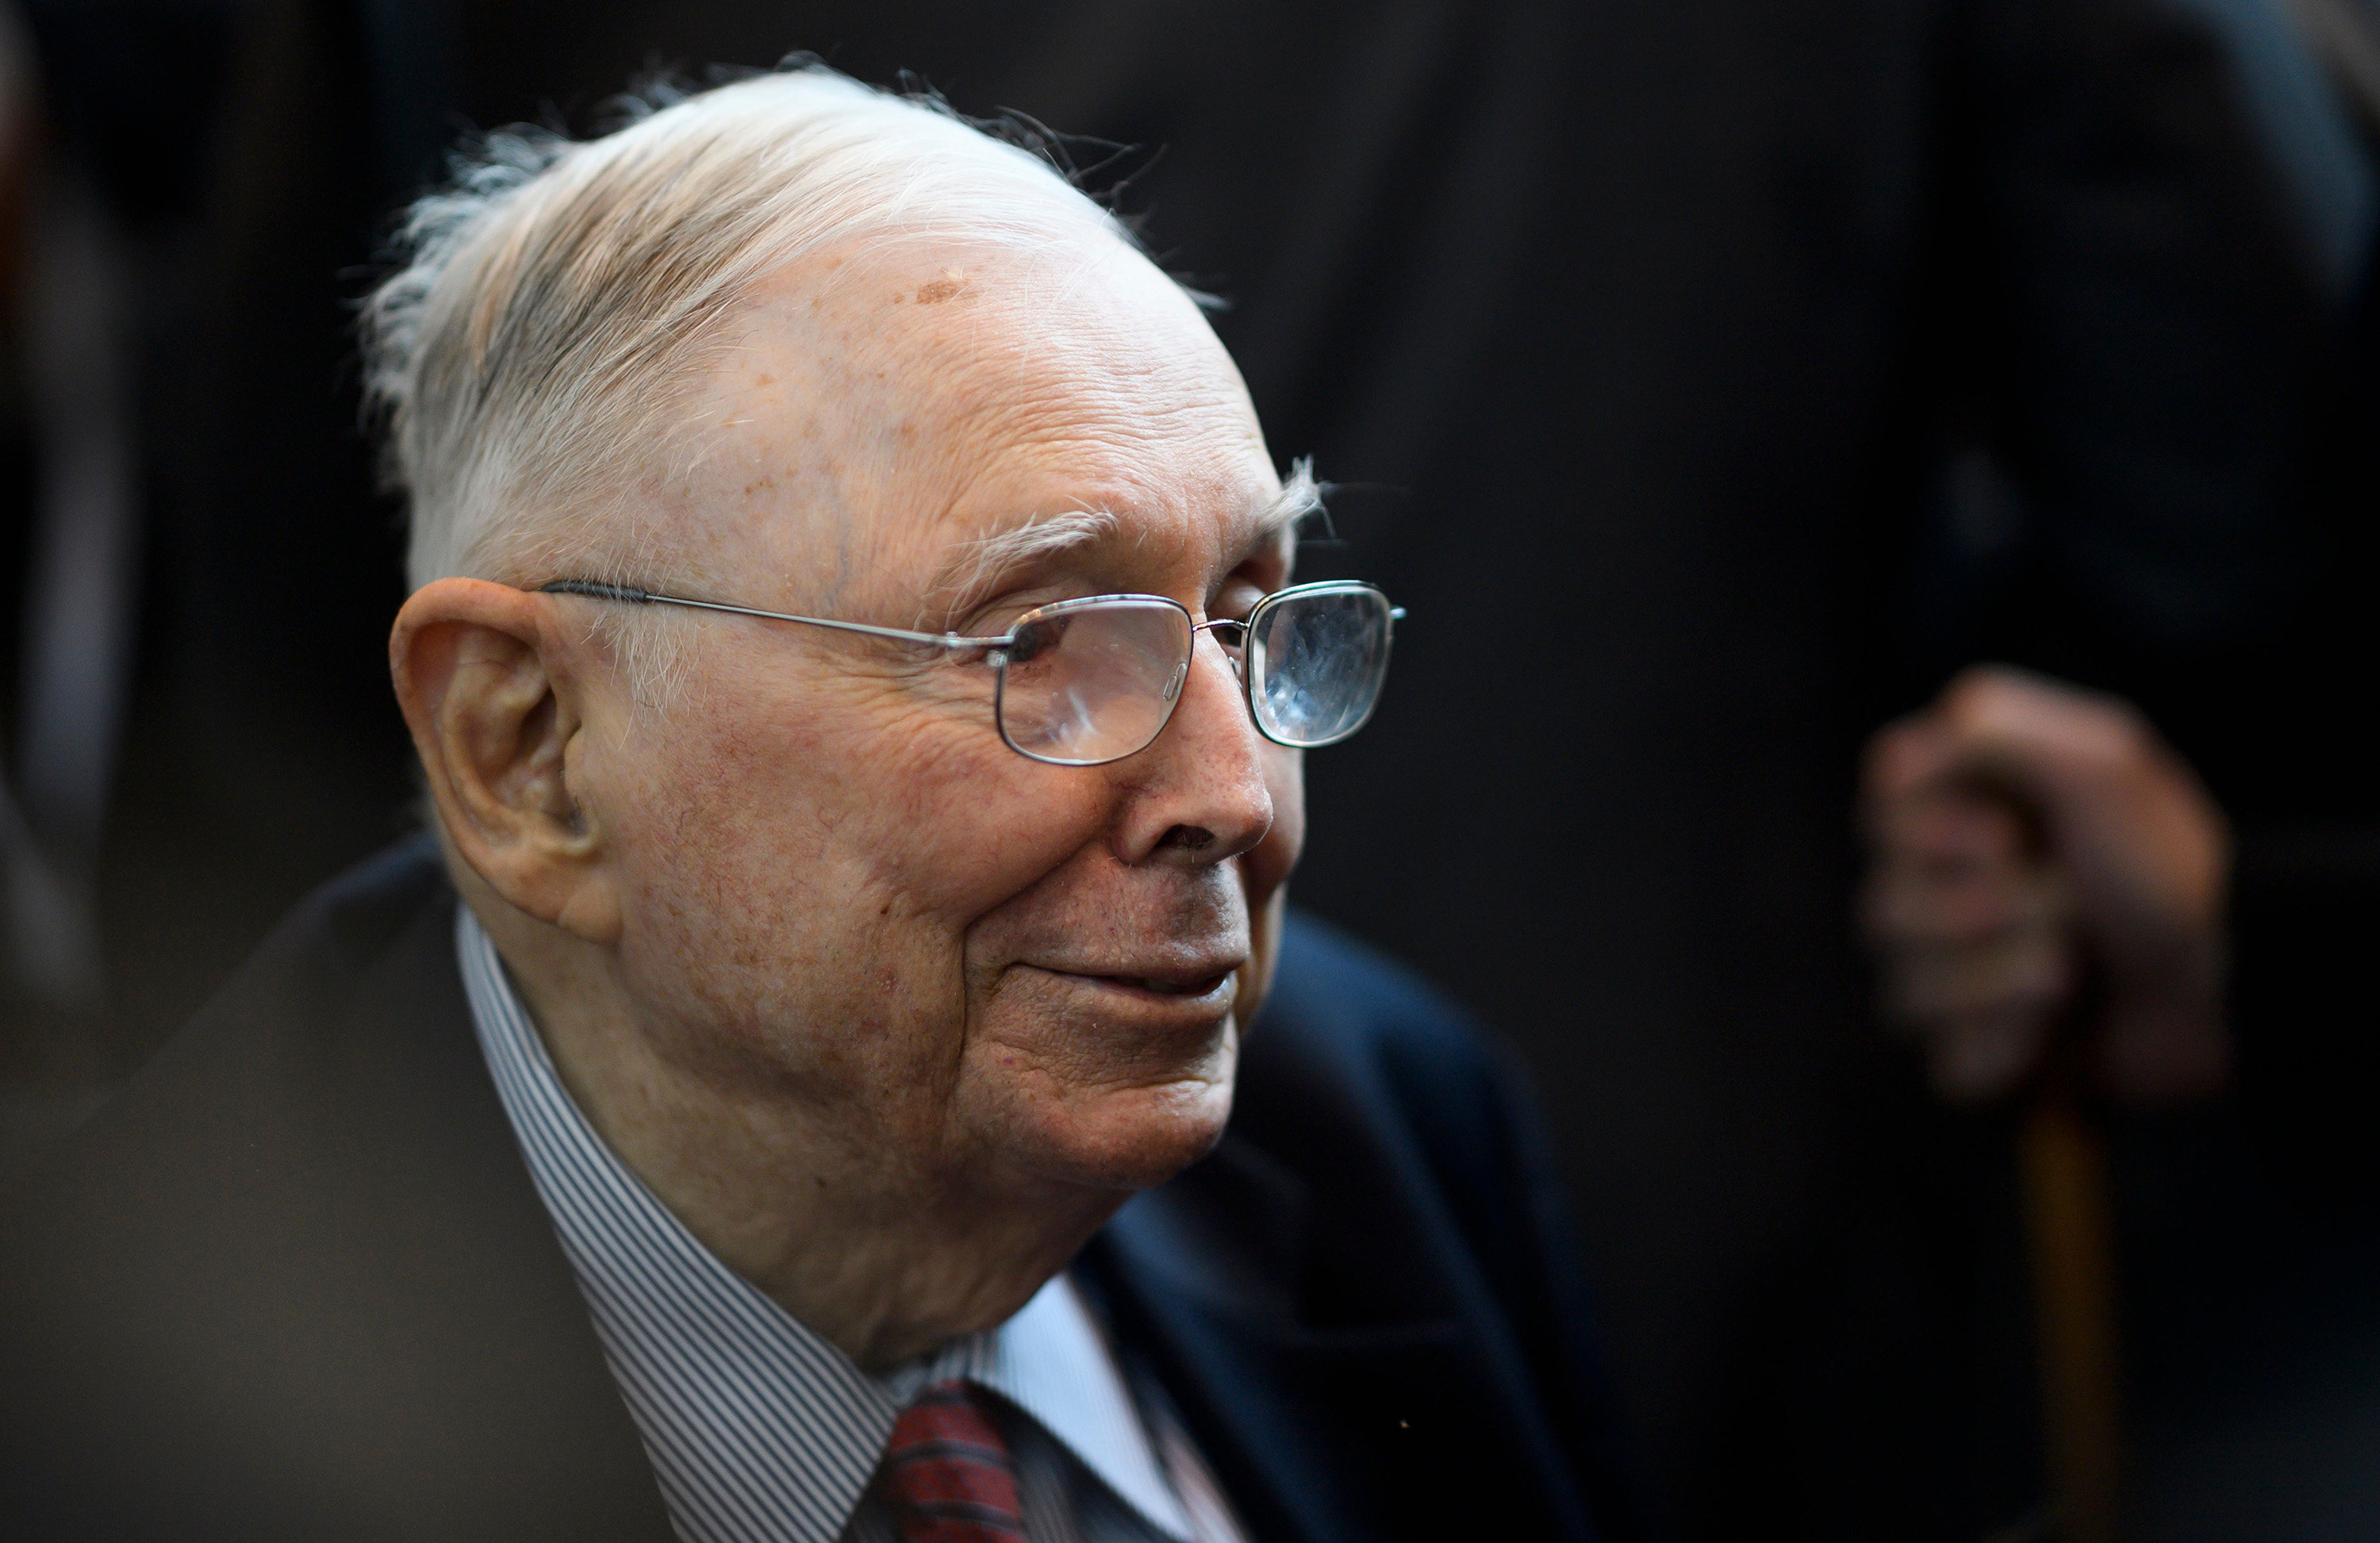 Berkshire Hathaway vice-chairman Charlie Munger pictured at the company’s annual shareholders’ meeting in Omaha, Nebraska in  May 2019. Photo: AFP/Getty Images/TNS